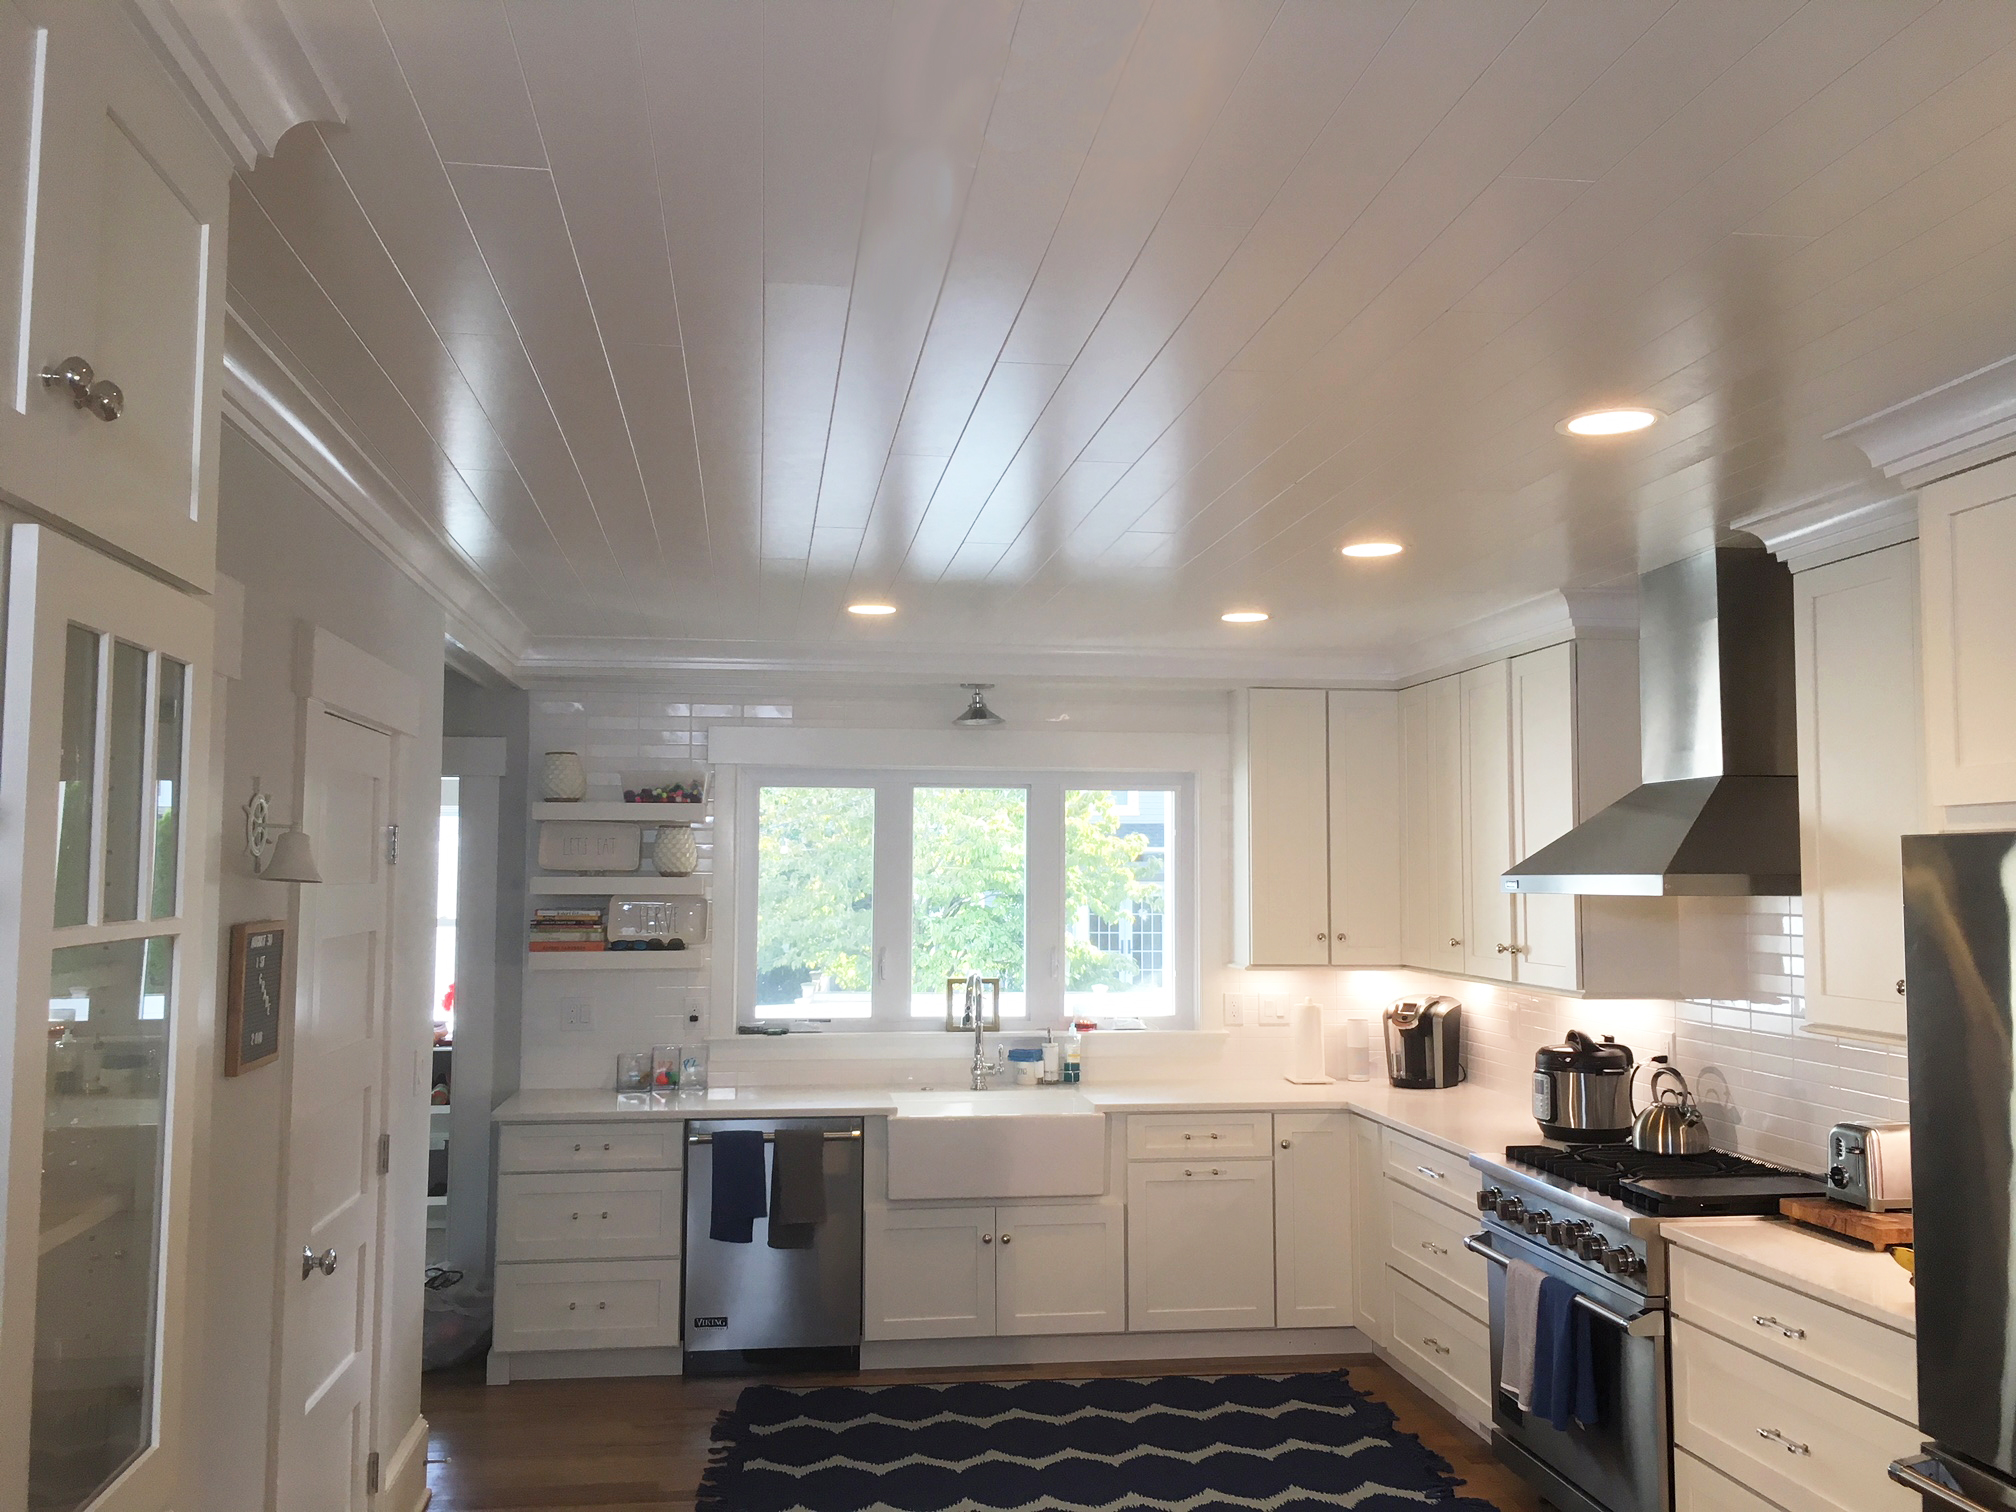 How To Install A Wood Look Plank Ceiling Ron Hazelton